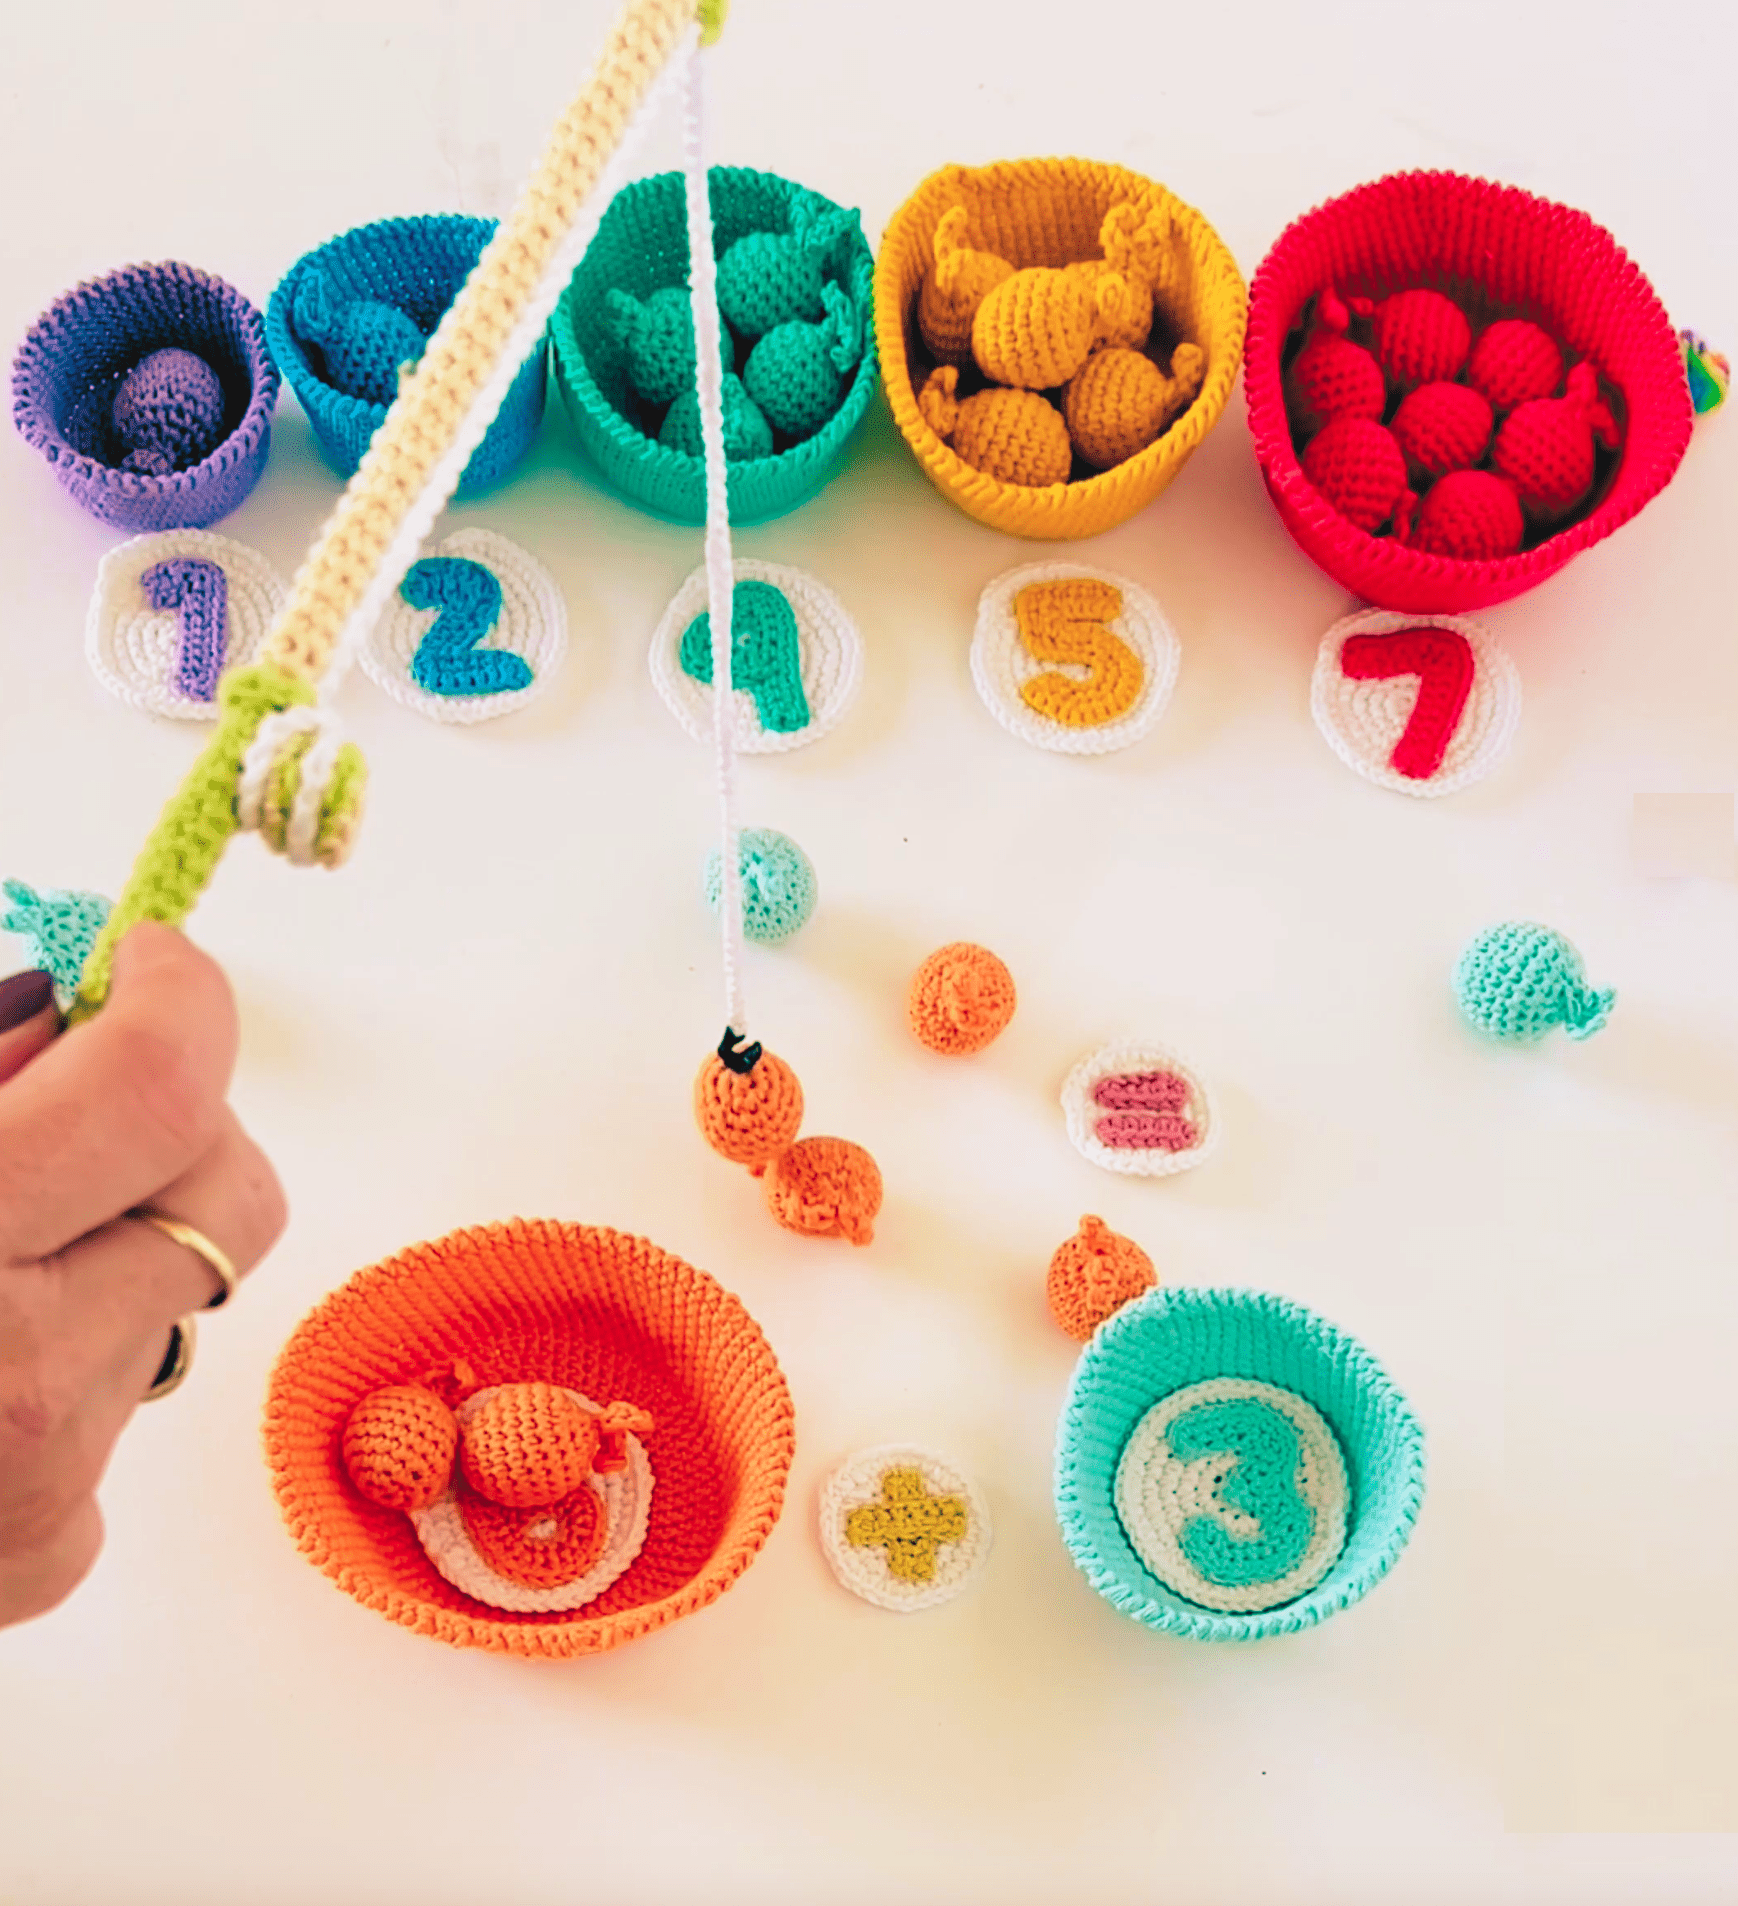 Catch & Count Interactive Game Crochet Pattern